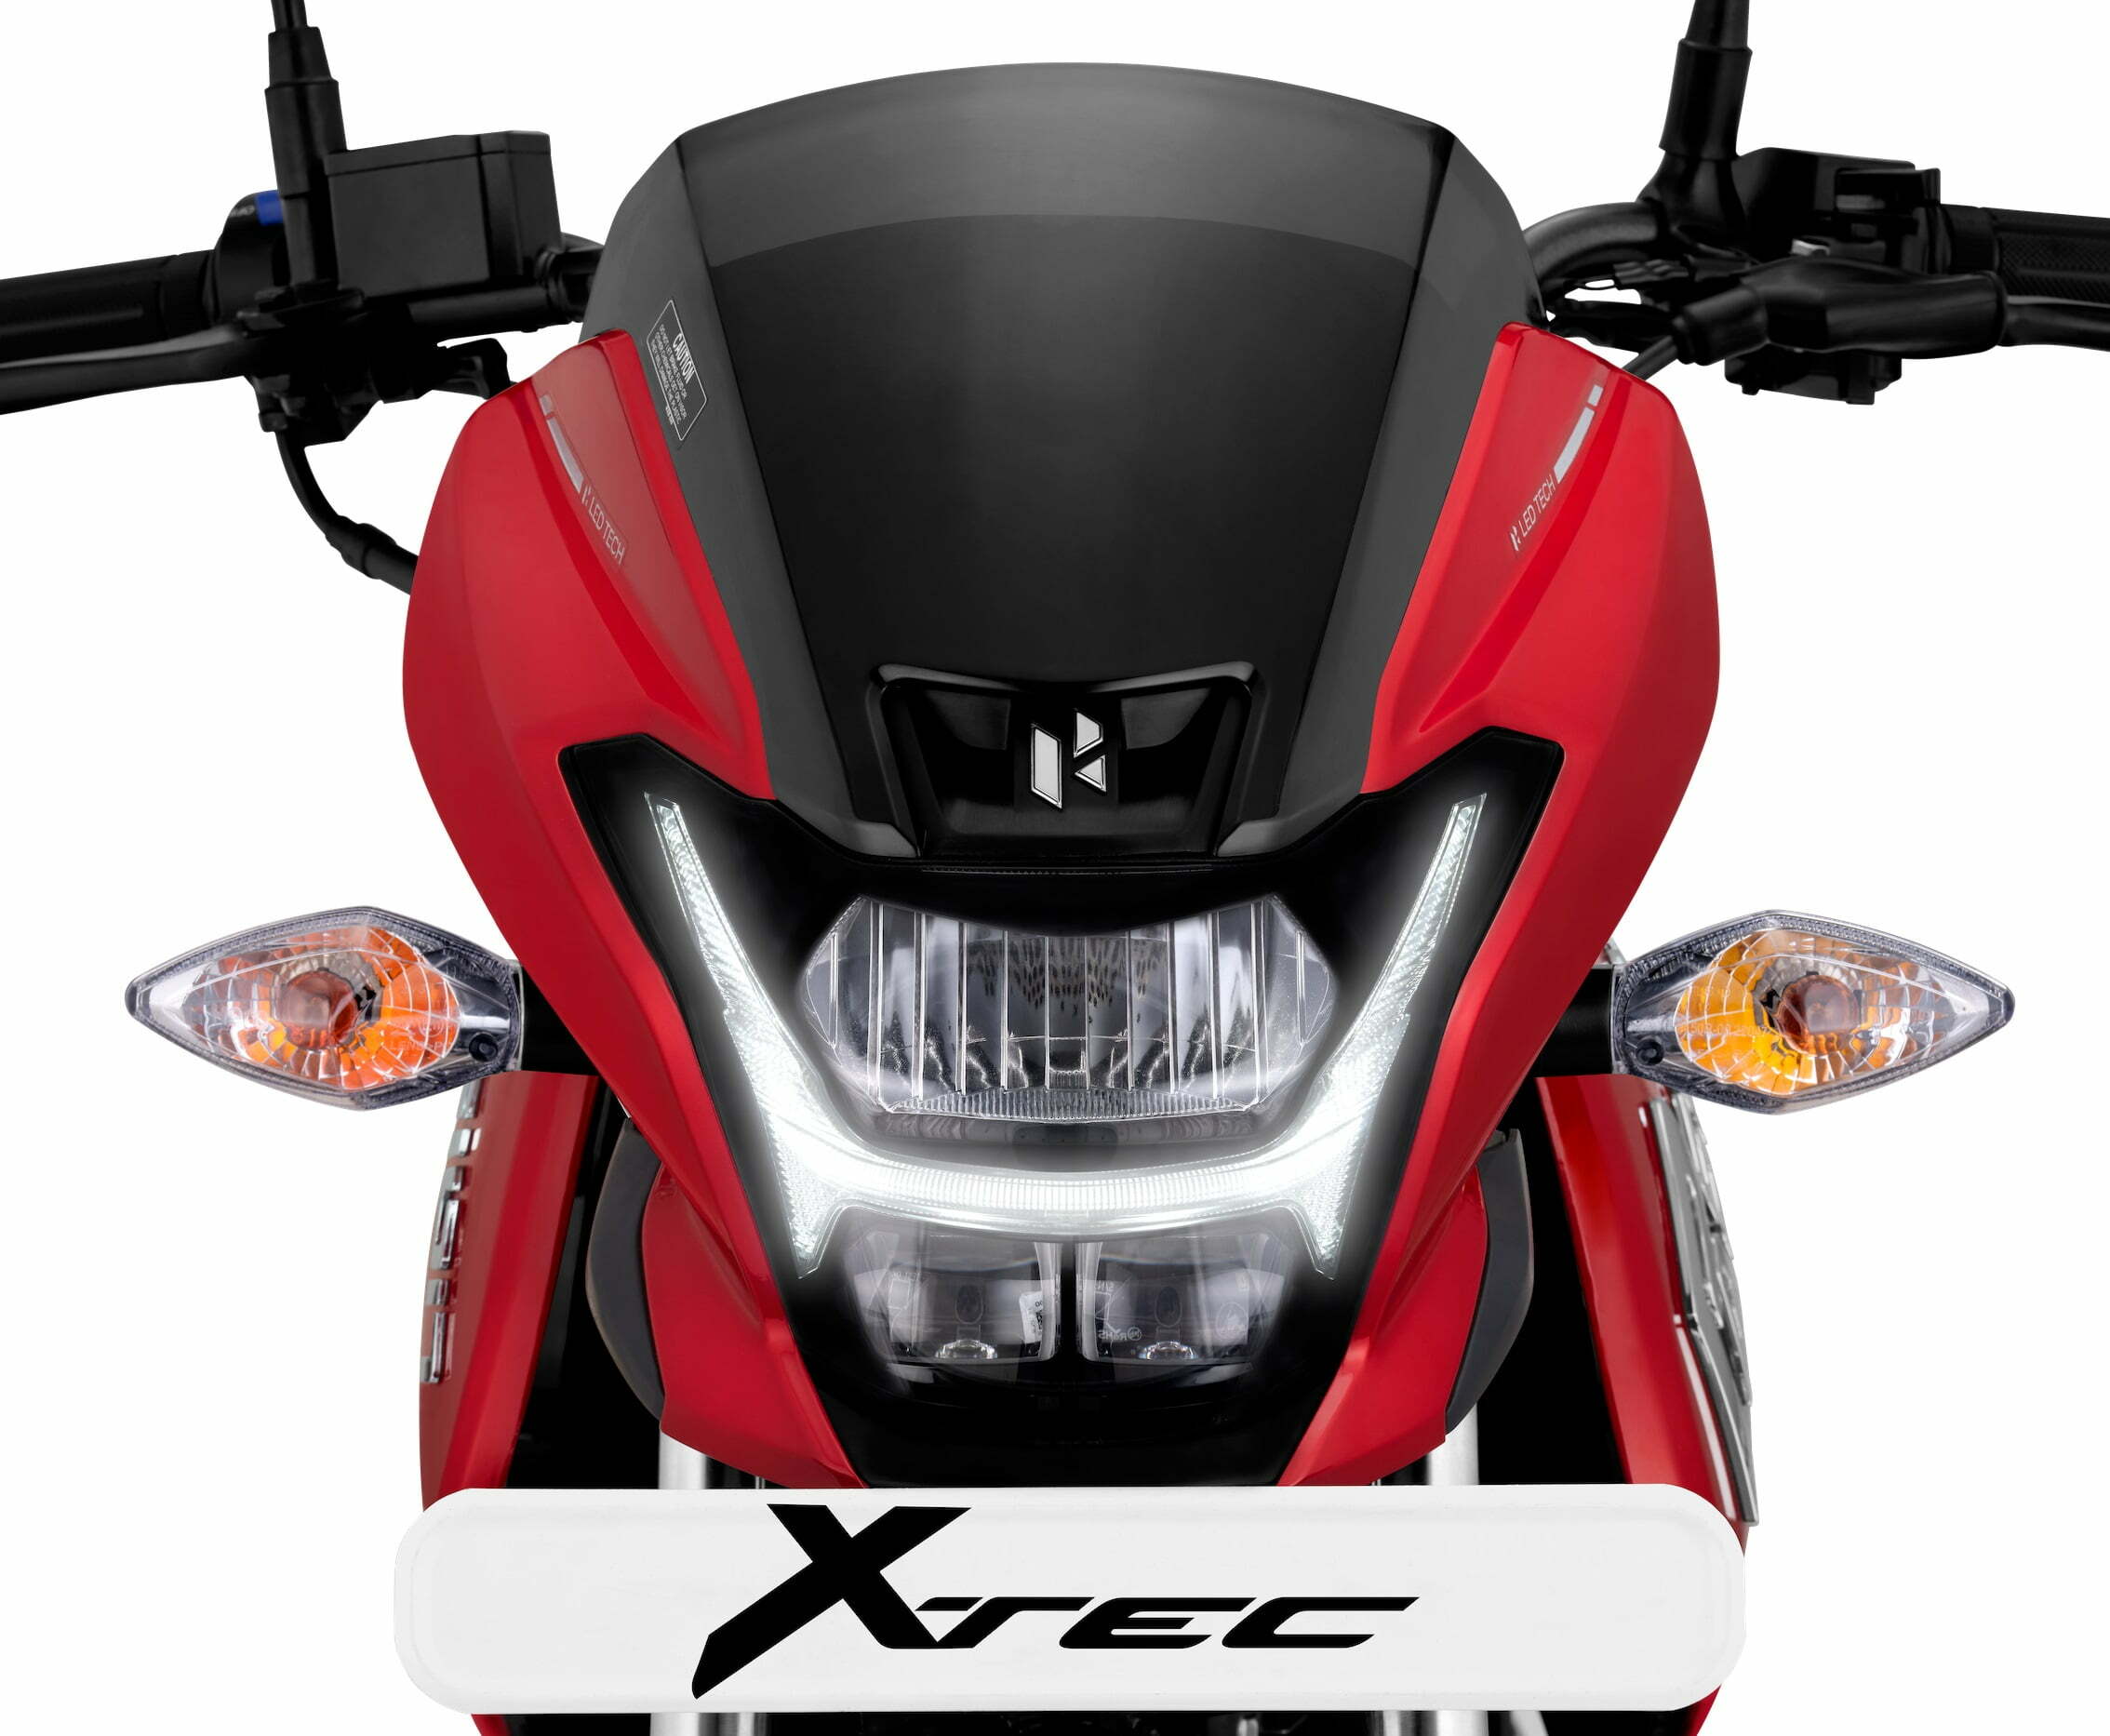 Hero Passion 110cc XTec Launched With More Features (1)